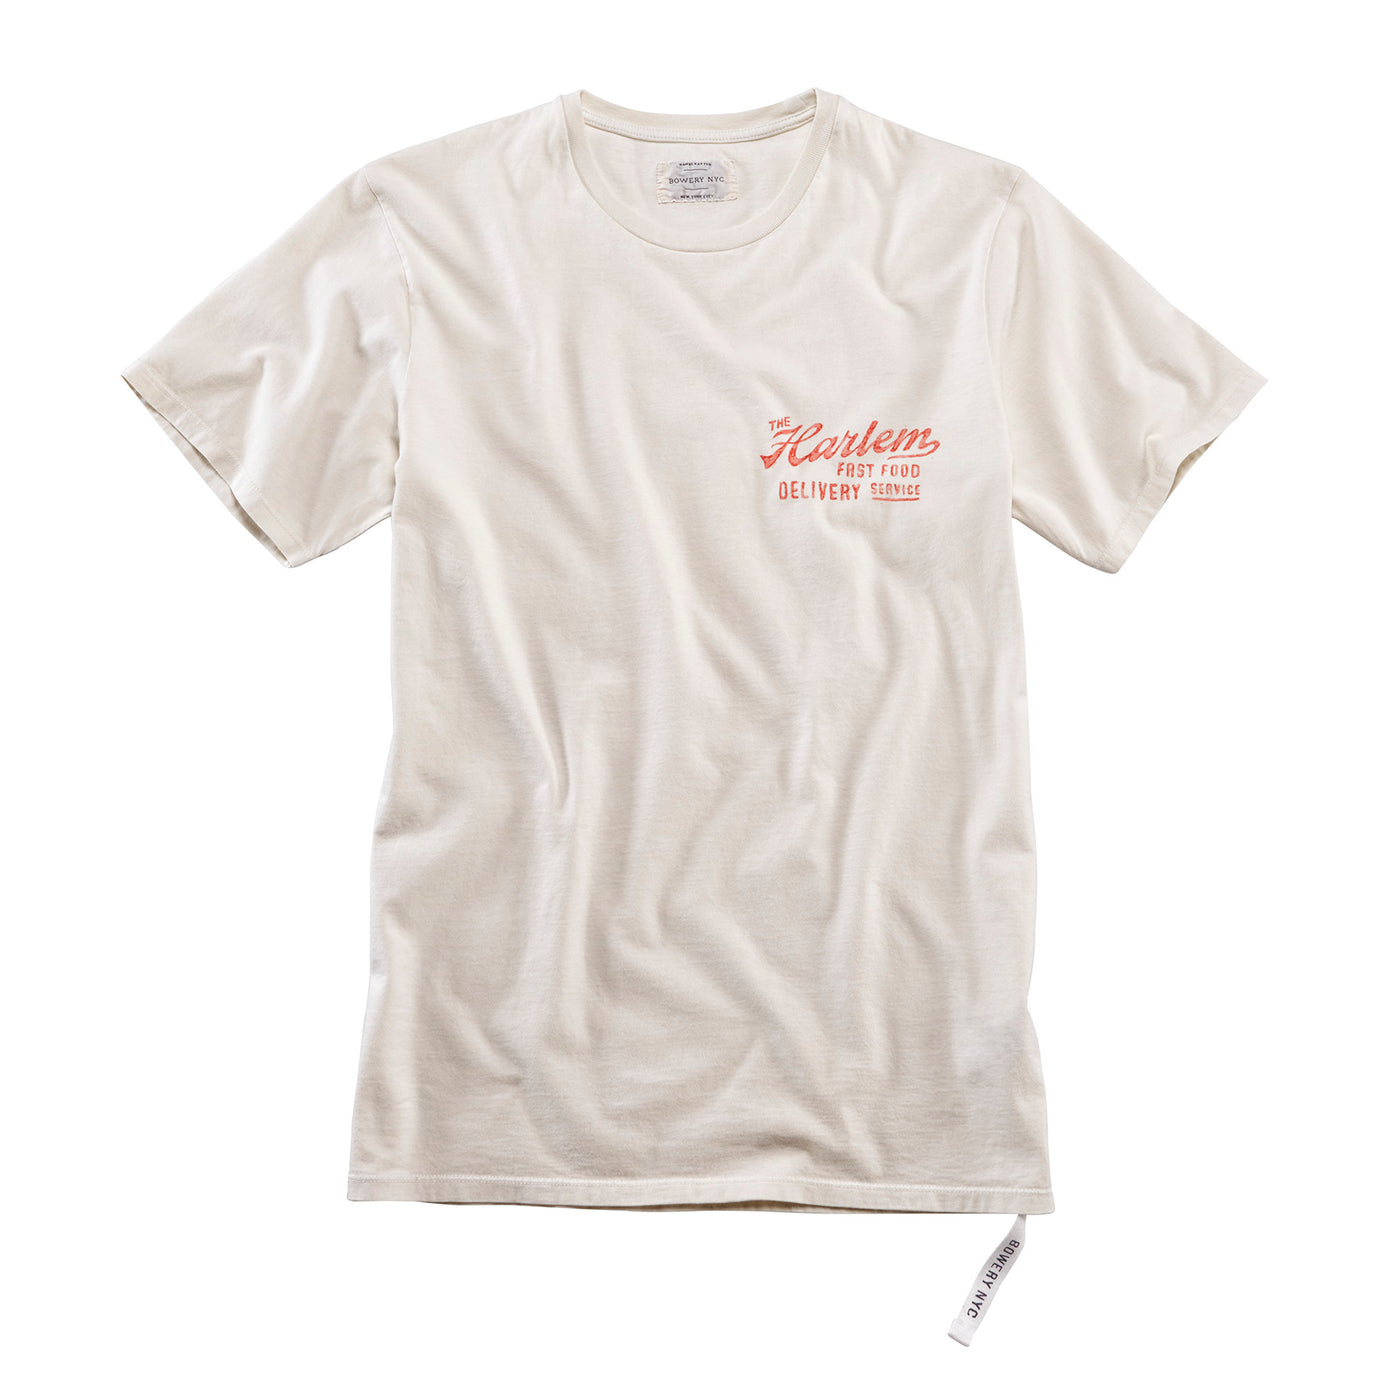 Bowery NYC T-Shirt Harlem Delivery